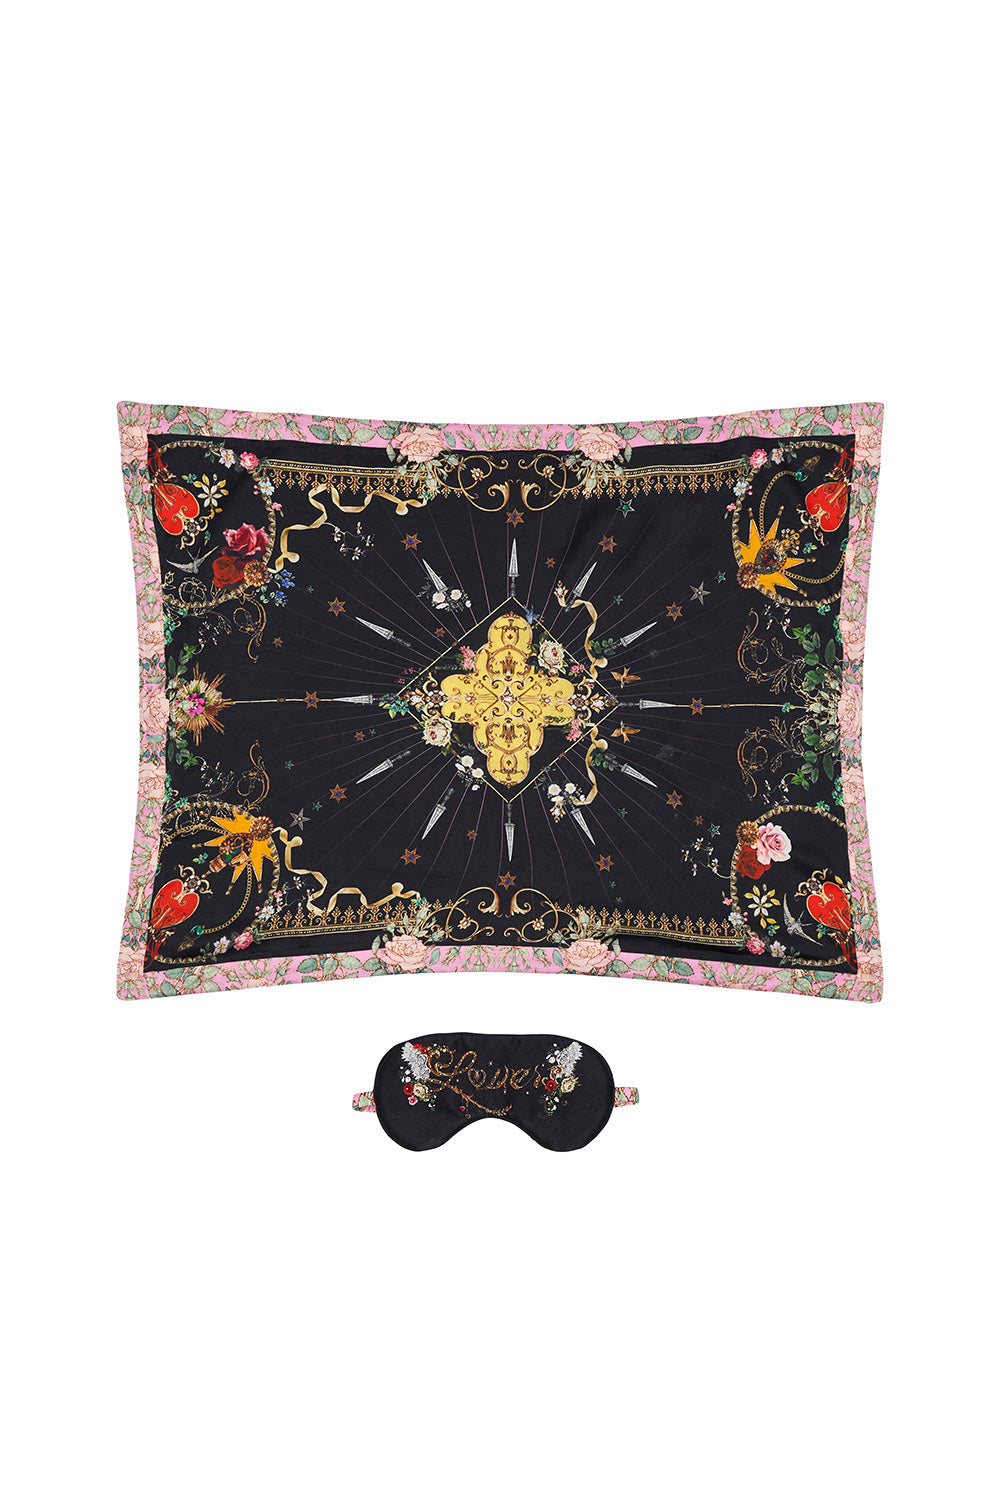 EYE MASK AND PILLOW SET MONTAGUES CAPULET